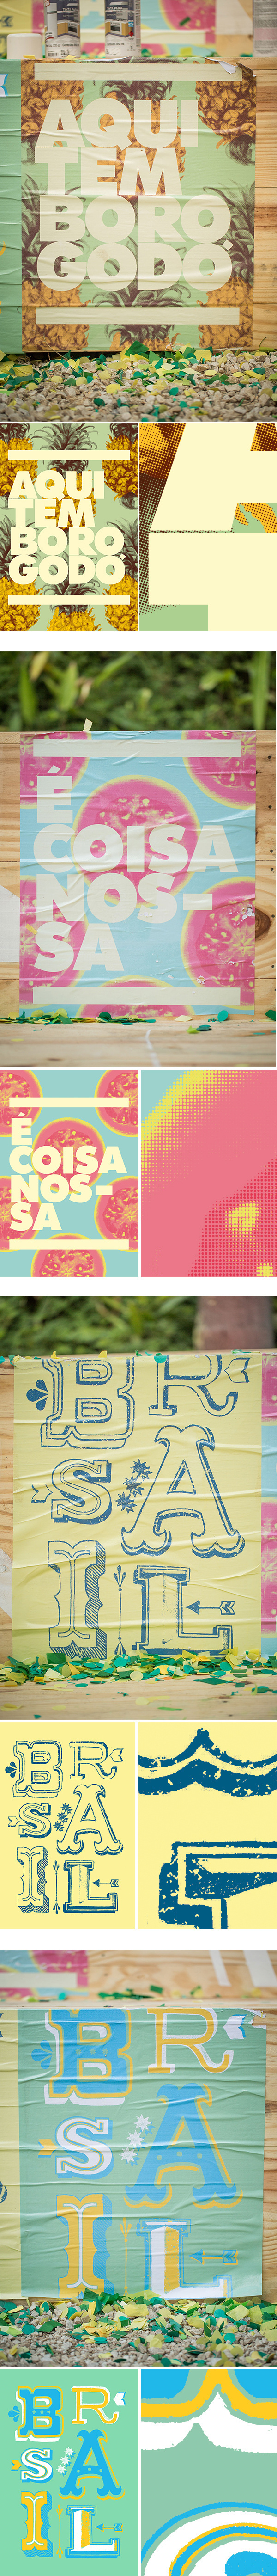 CWorld cup idea #118: Fifa World Cup 2014 on Behance #typography #poster #lettering #fruit #world cup #brazil